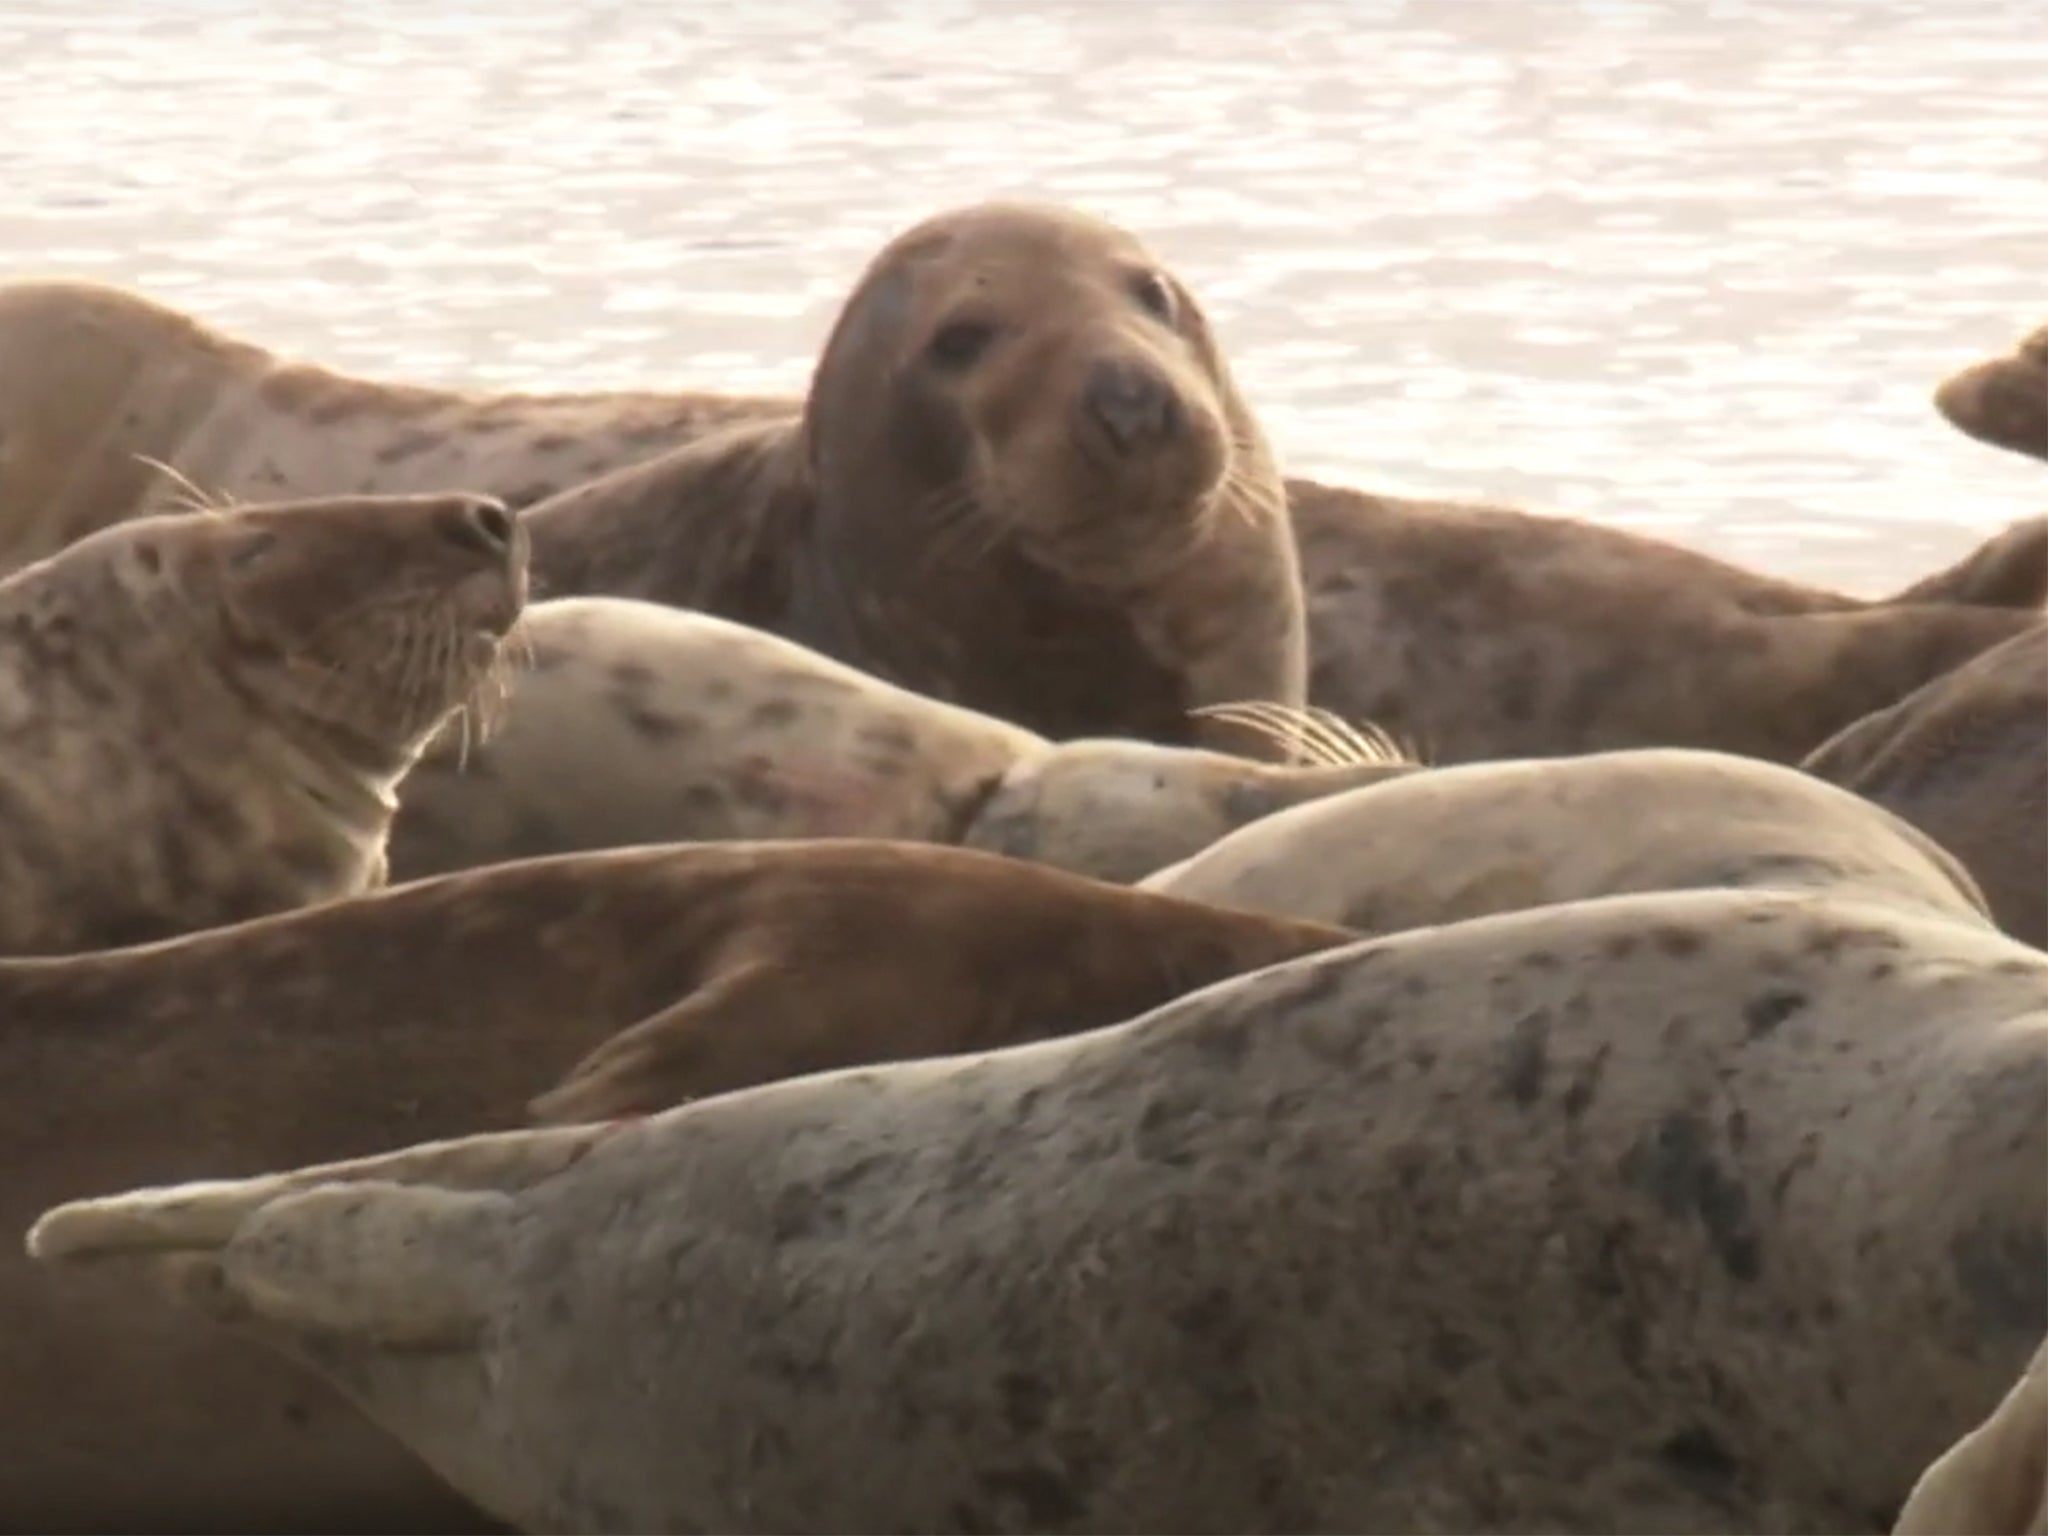 South Walney Nature Reserve has the only grey seal colony in Cumbria